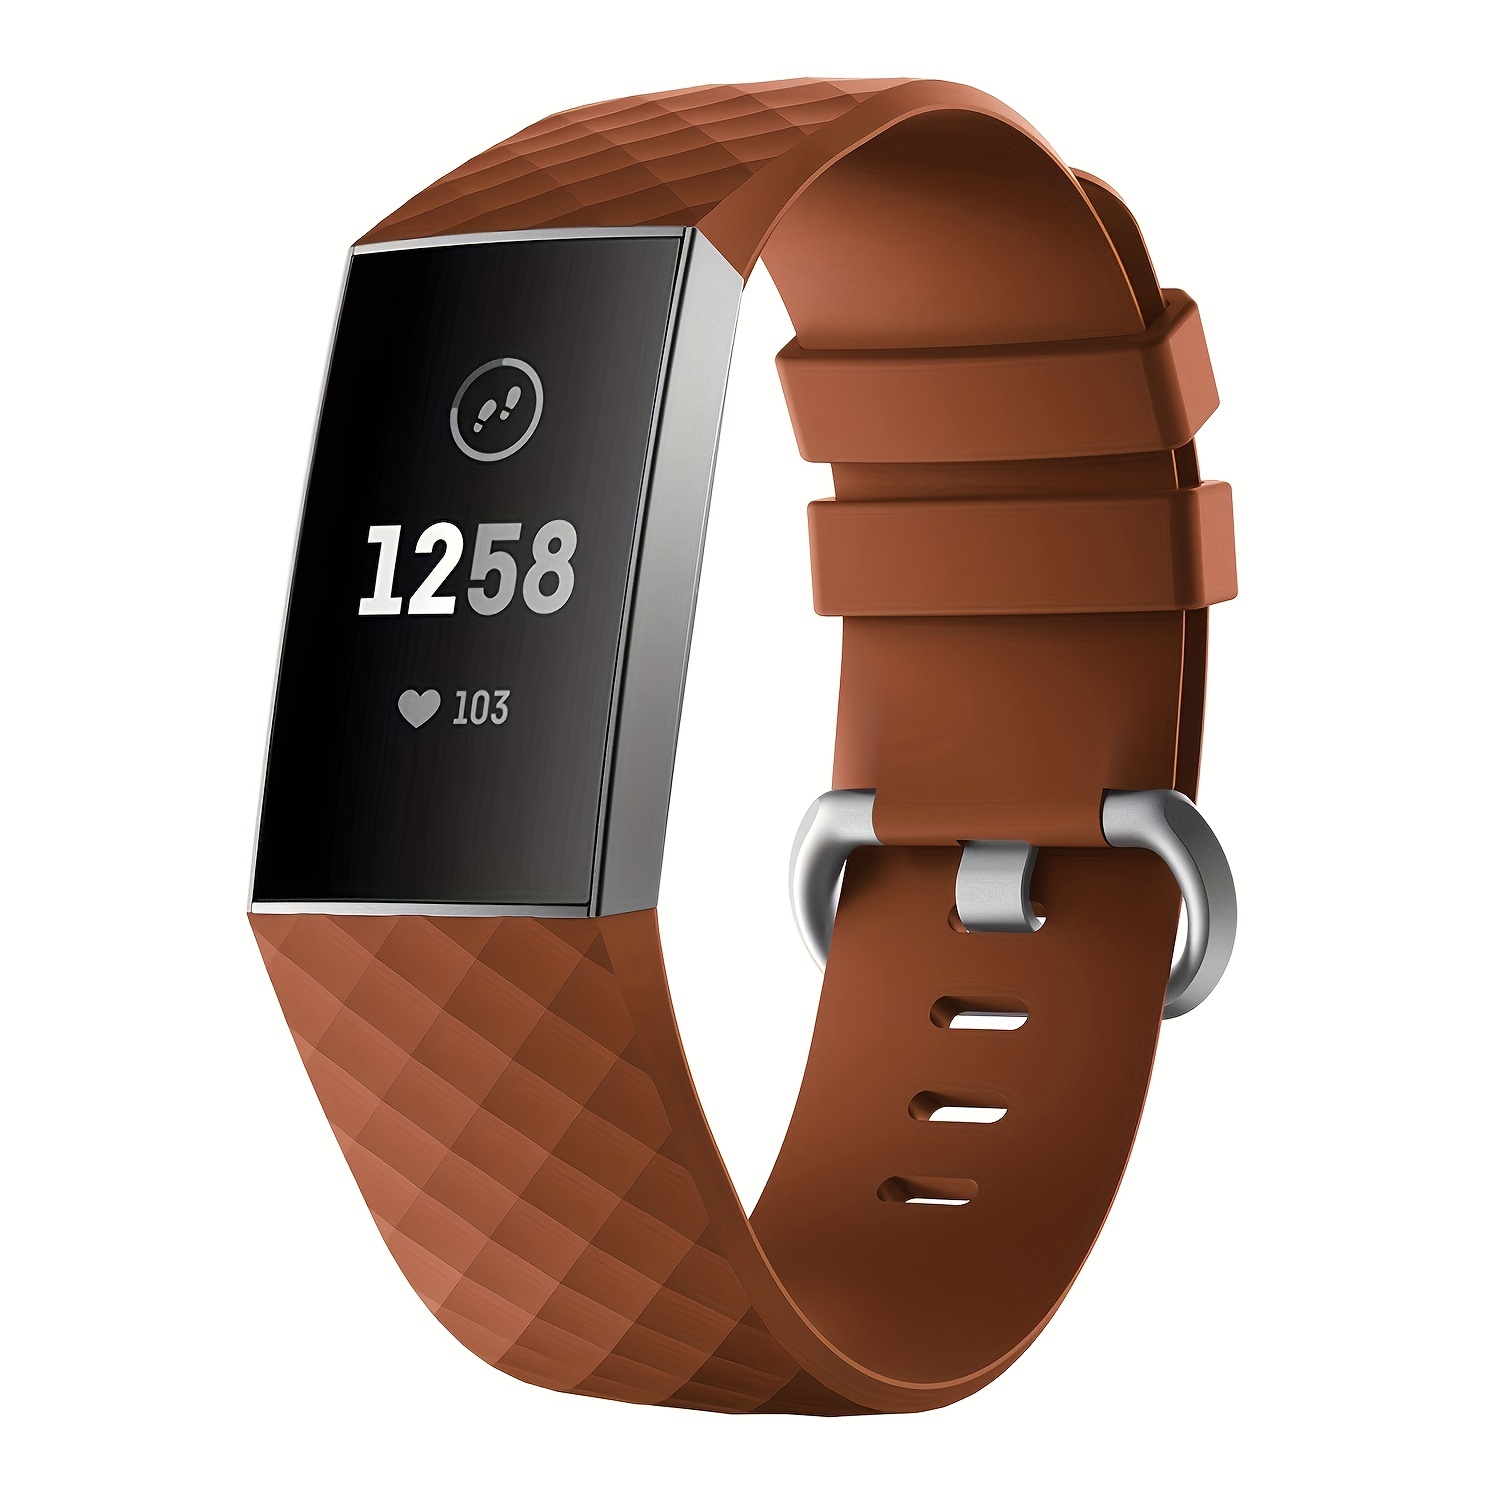 Silicone Sport Bands For Fitbit Charge 3 / Charge 4 Tracker